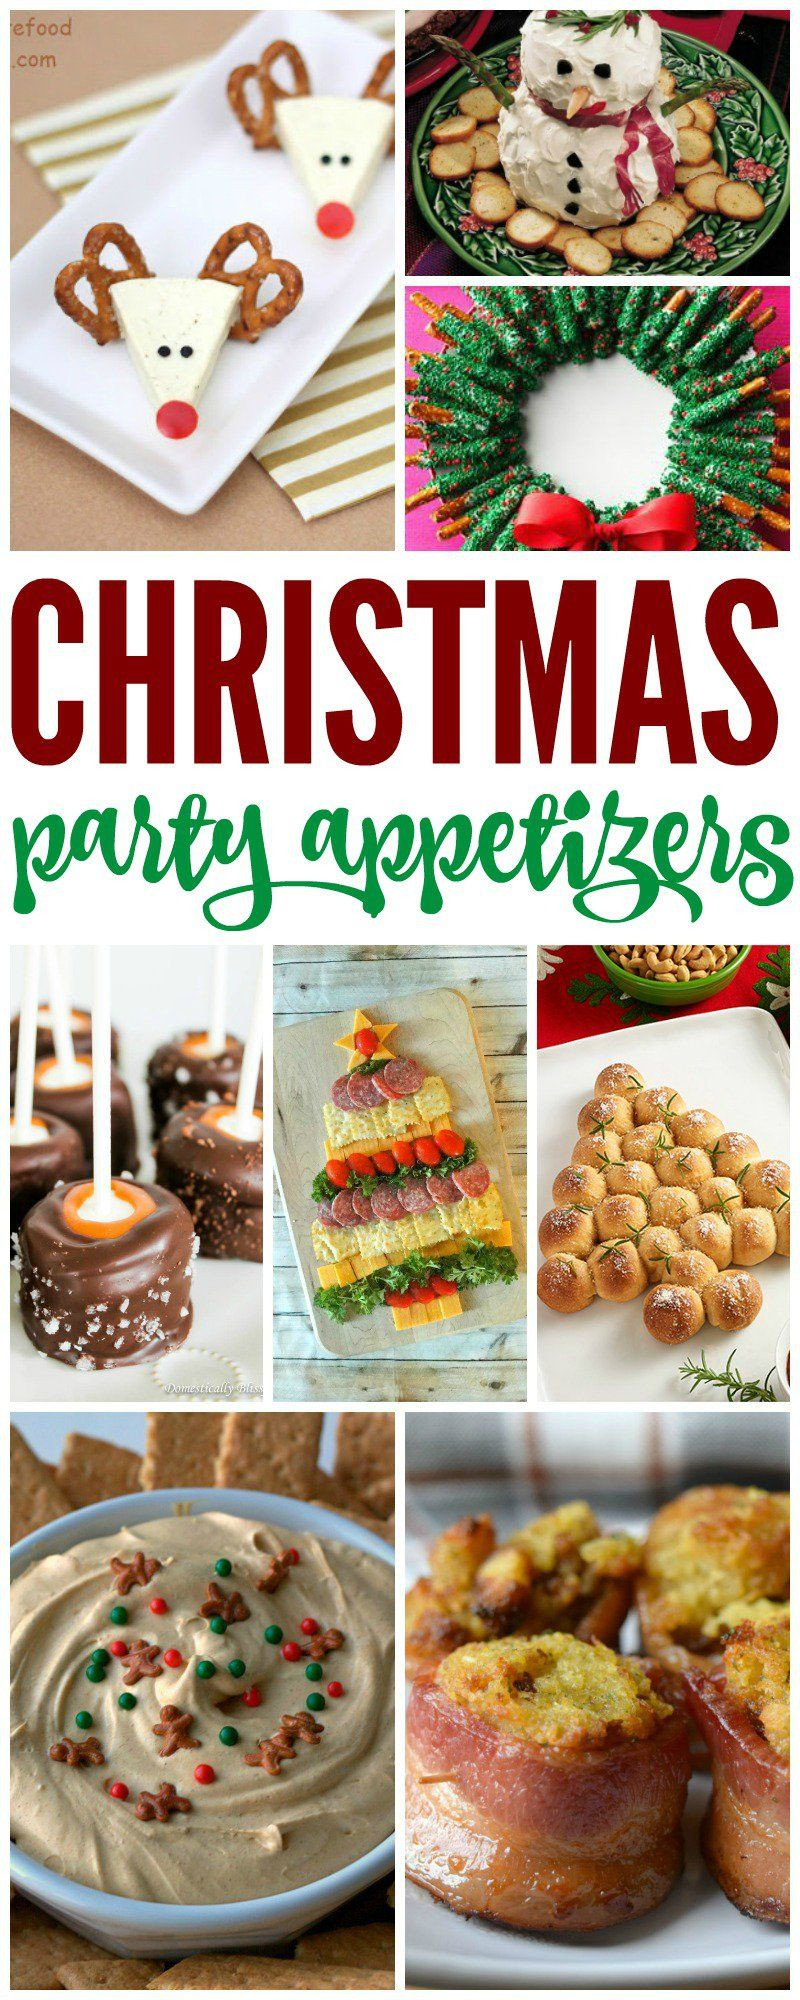 Christmas Office Party Food Ideas
 Christmas Party Appetizers Some of the best recipes to